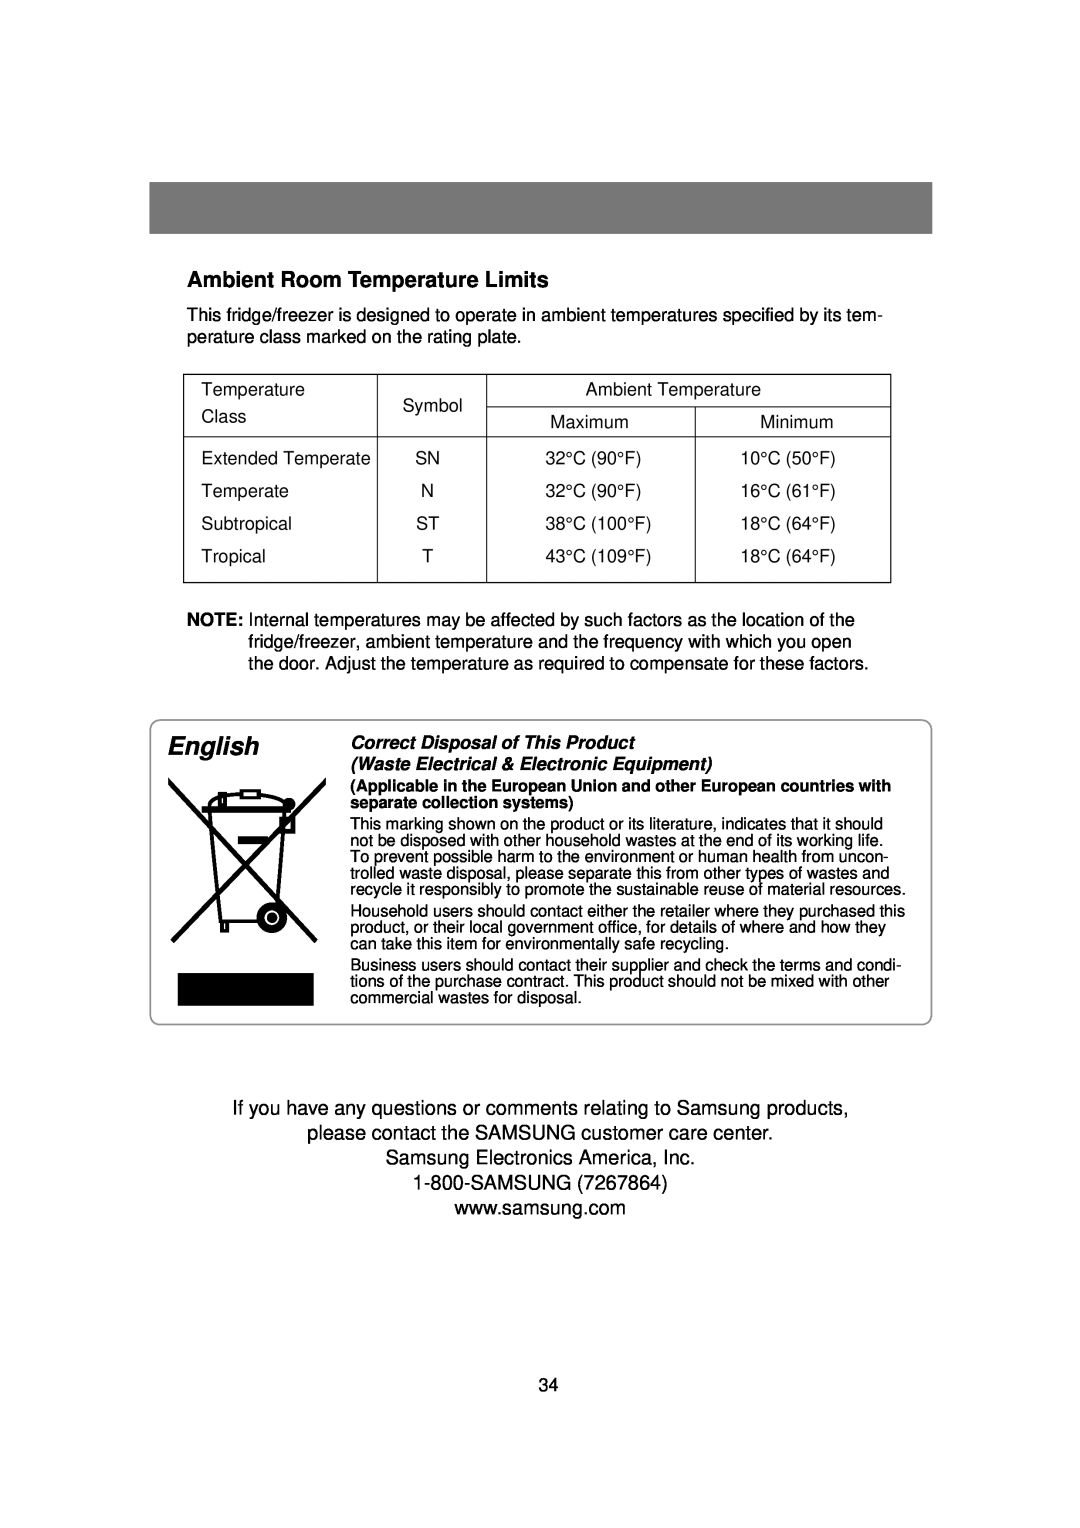 Samsung RSE8KPUS2/XEK manual Ambient Room Temperature Limits, English, please contact the SAMSUNG customer care center 